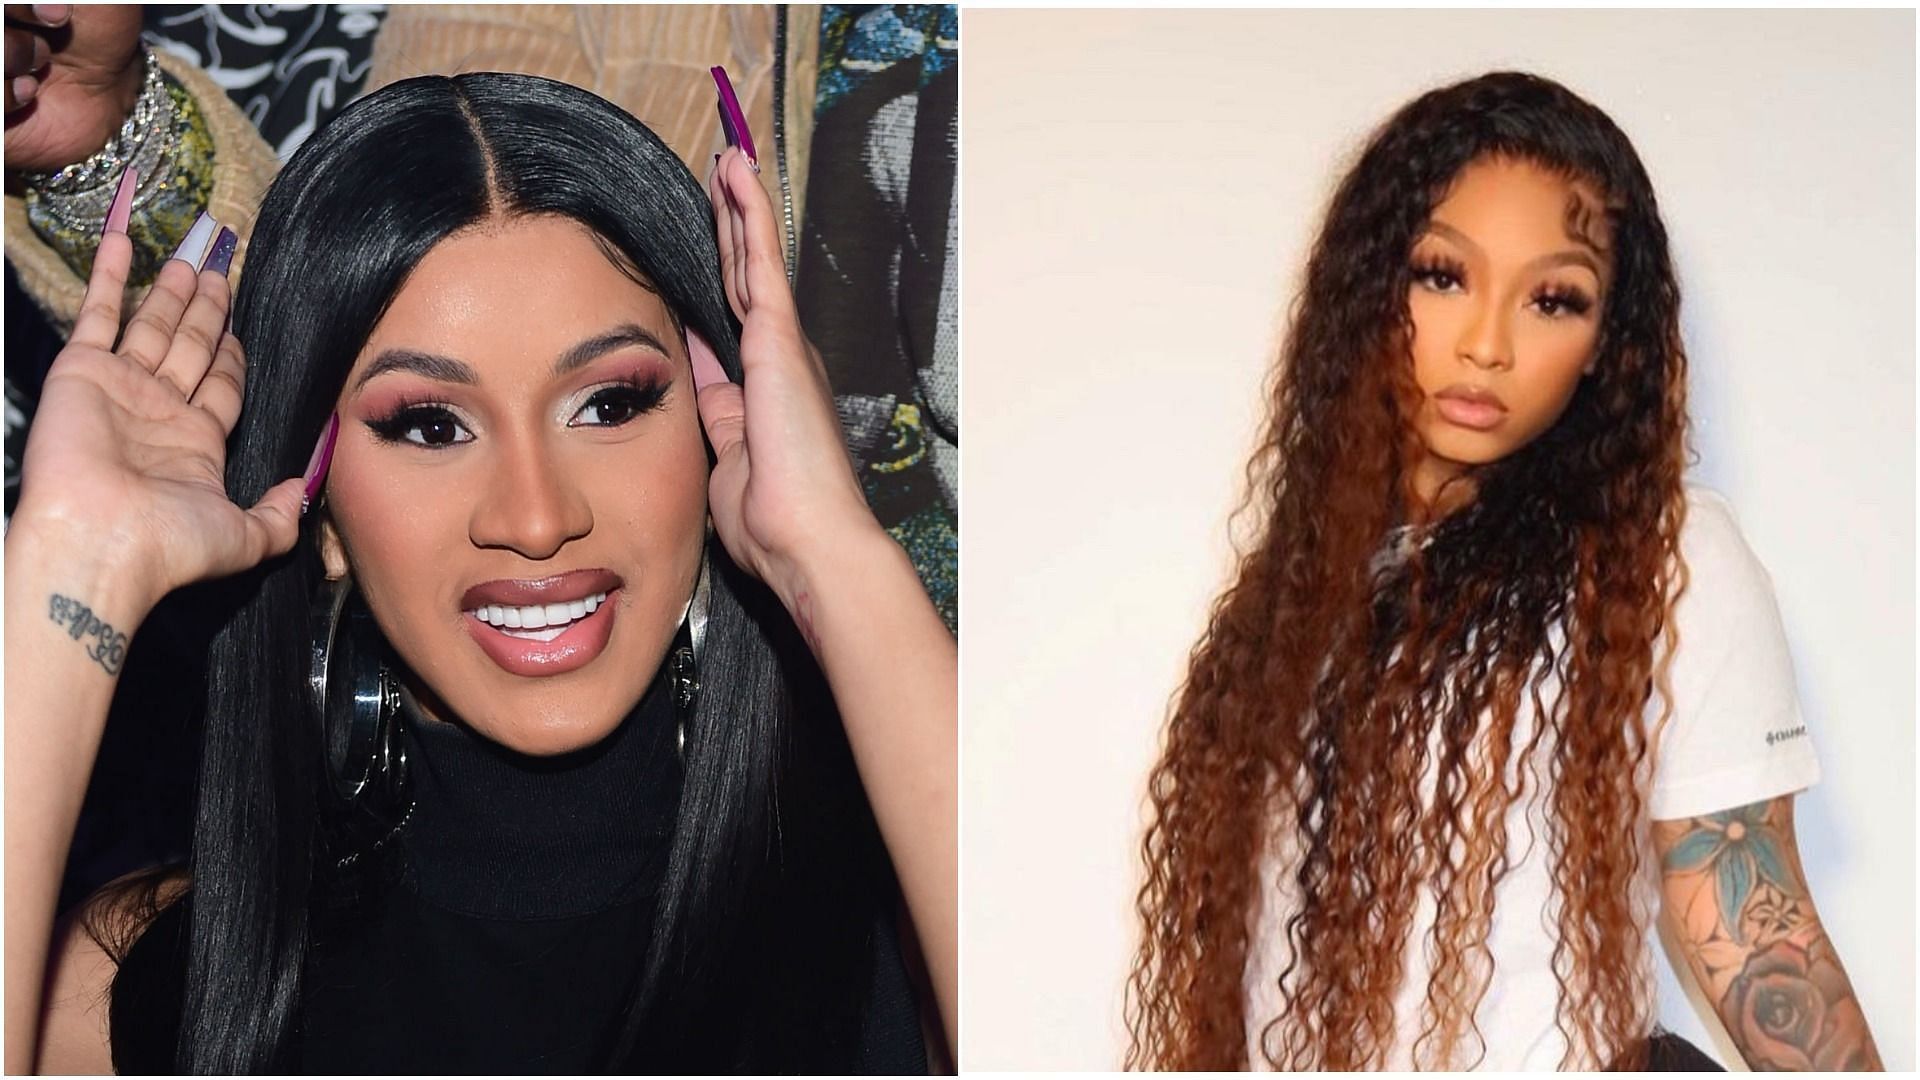 Who is Cuban Doll? Rapper fuels beef with Cardi B over Offset's alleged cheating scandal